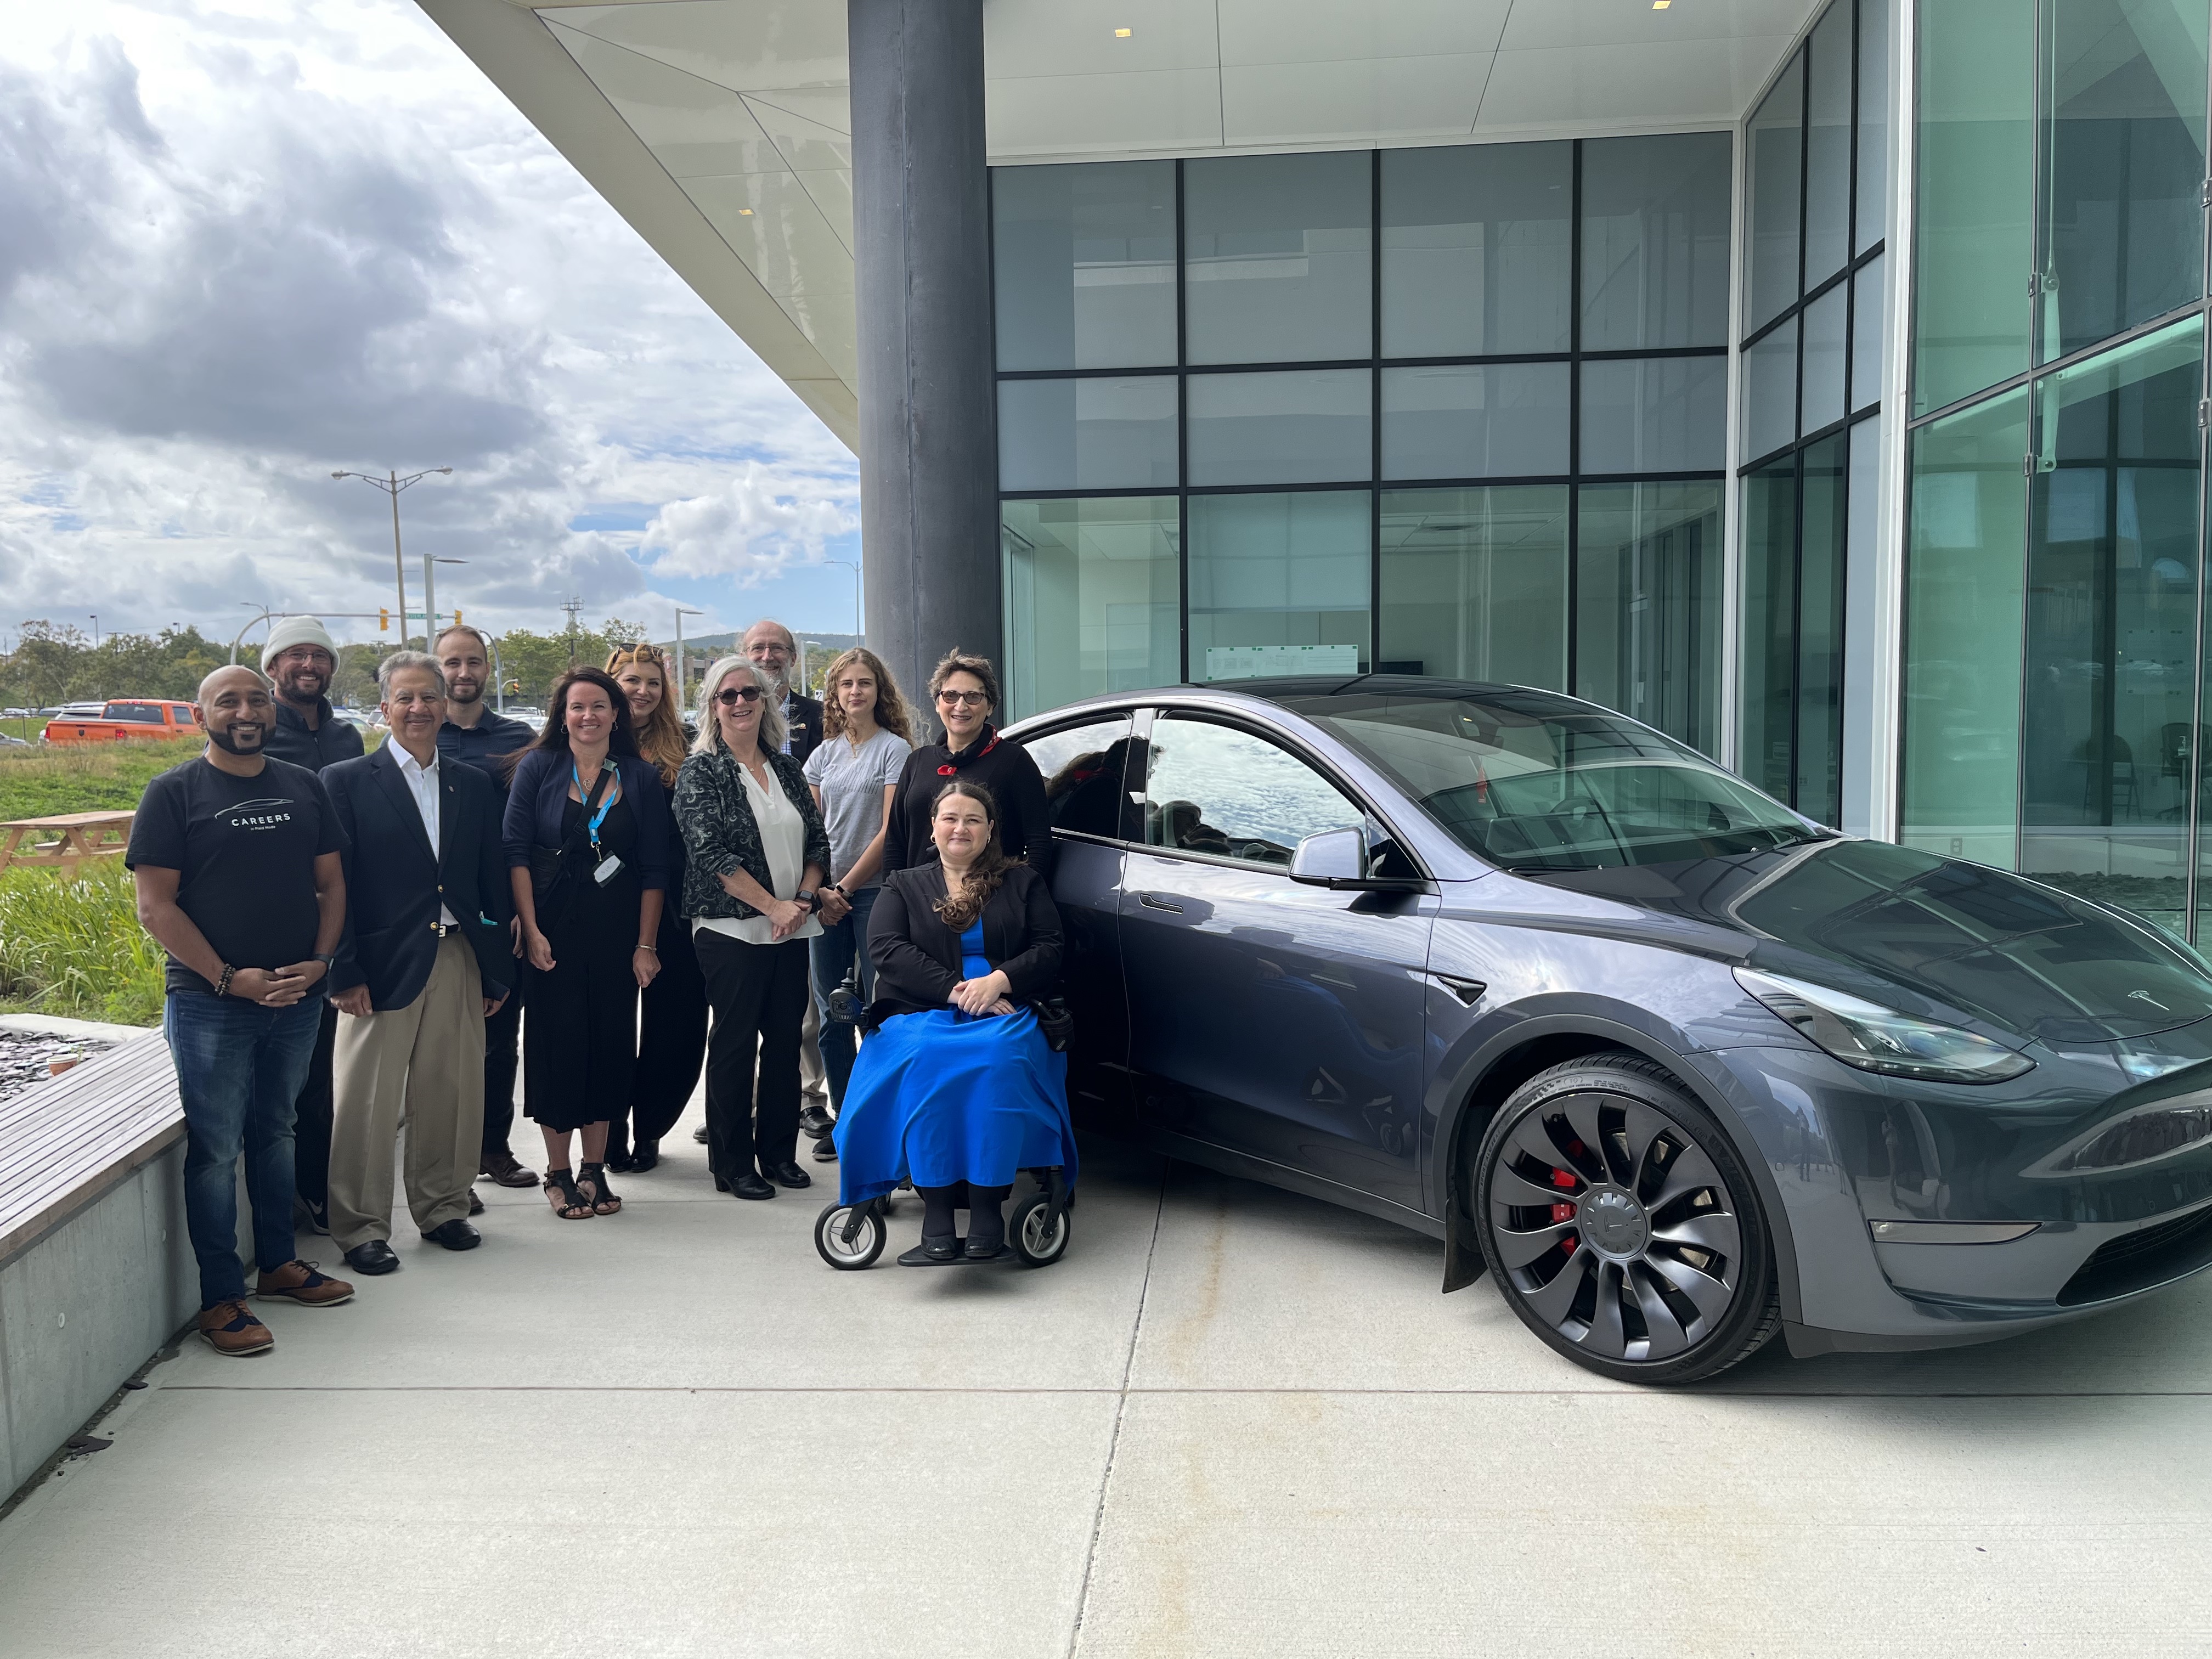 Members of Tesla's recruitment team and the Memorial community pose next to a Tesla vehicle.